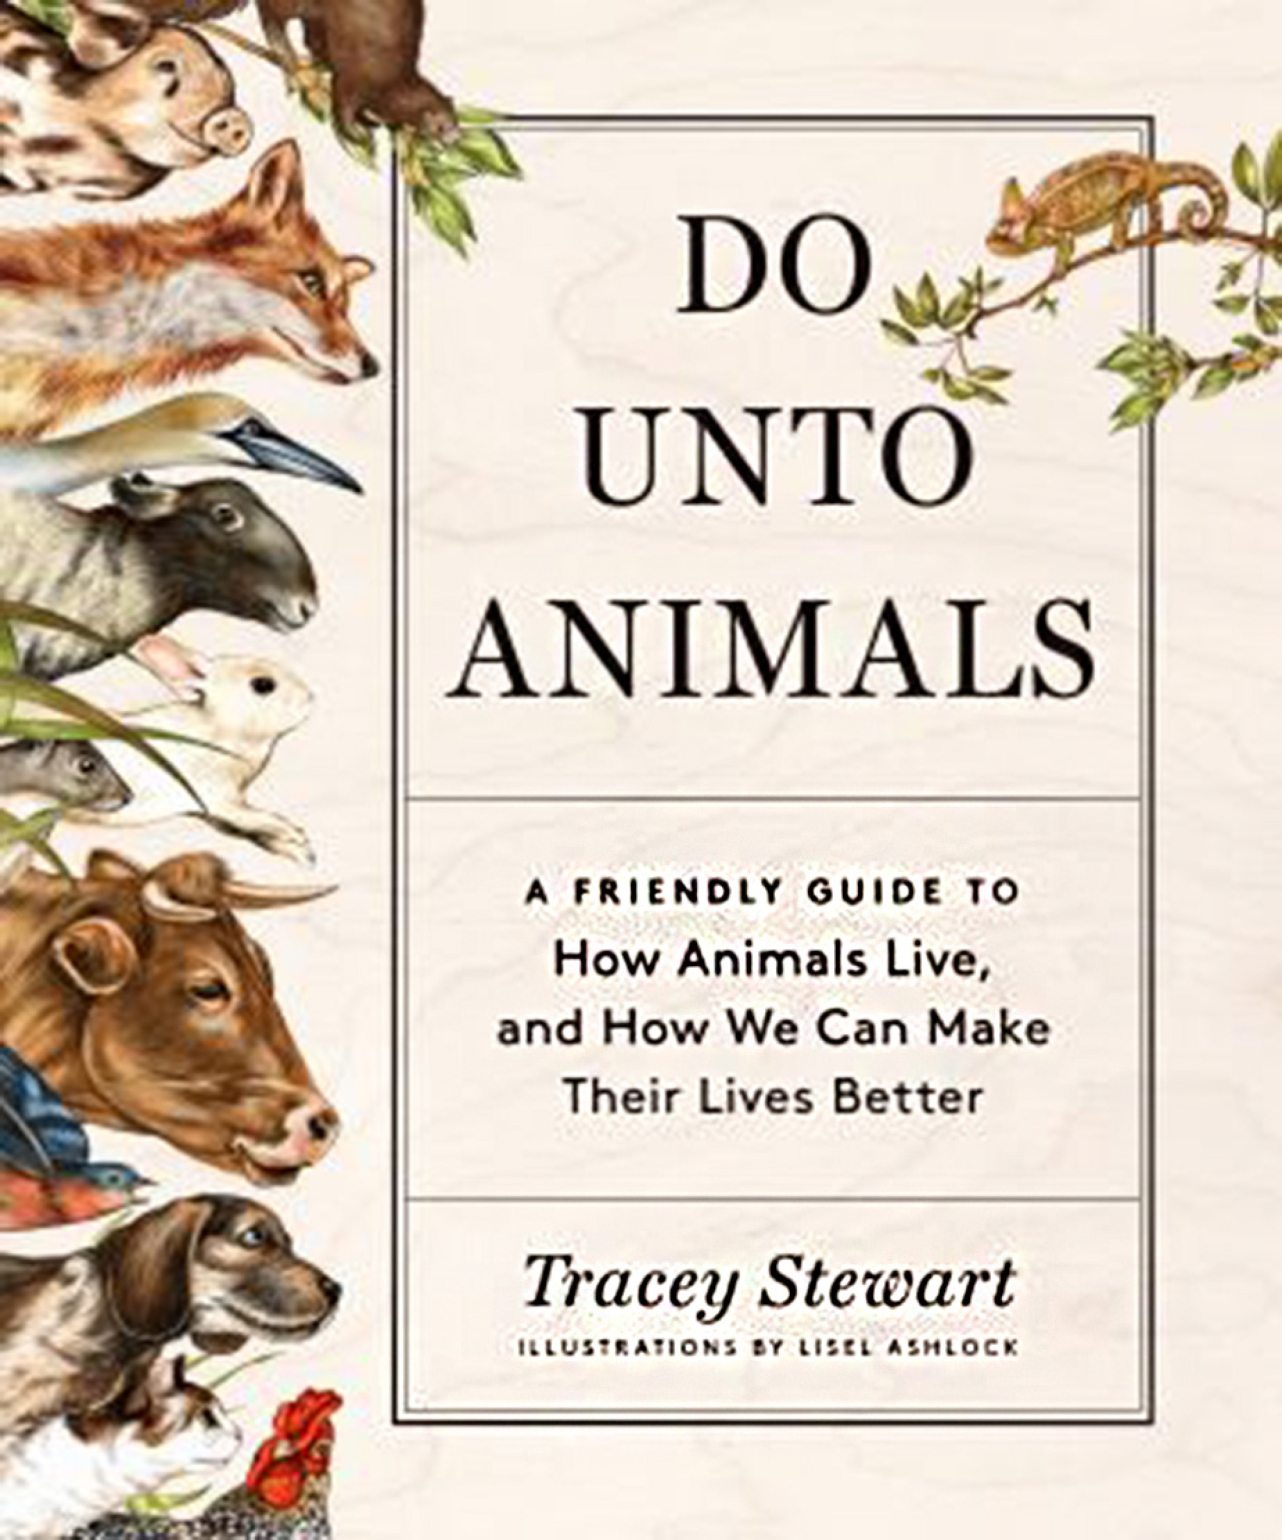 &quot;Do Unto Animals: A Friendly Guide to How Animals Live, and How We Can Make Their Lives Better&quot; by Tracey Stewart (Artisan, 199 pages)